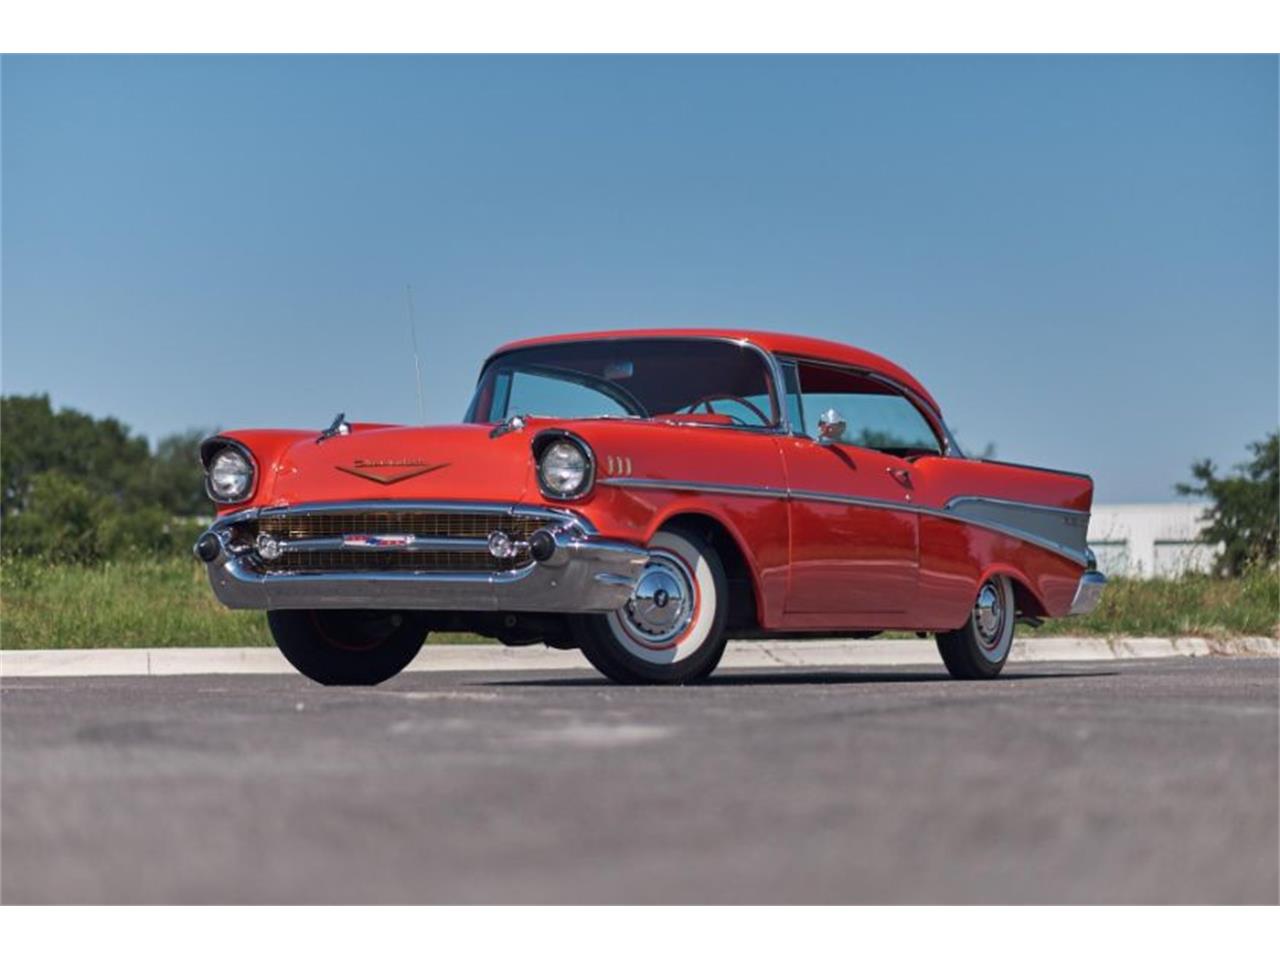 For Sale: 1957 Chevrolet Bel Air in Hobart, Indiana for sale in Hobart, IN